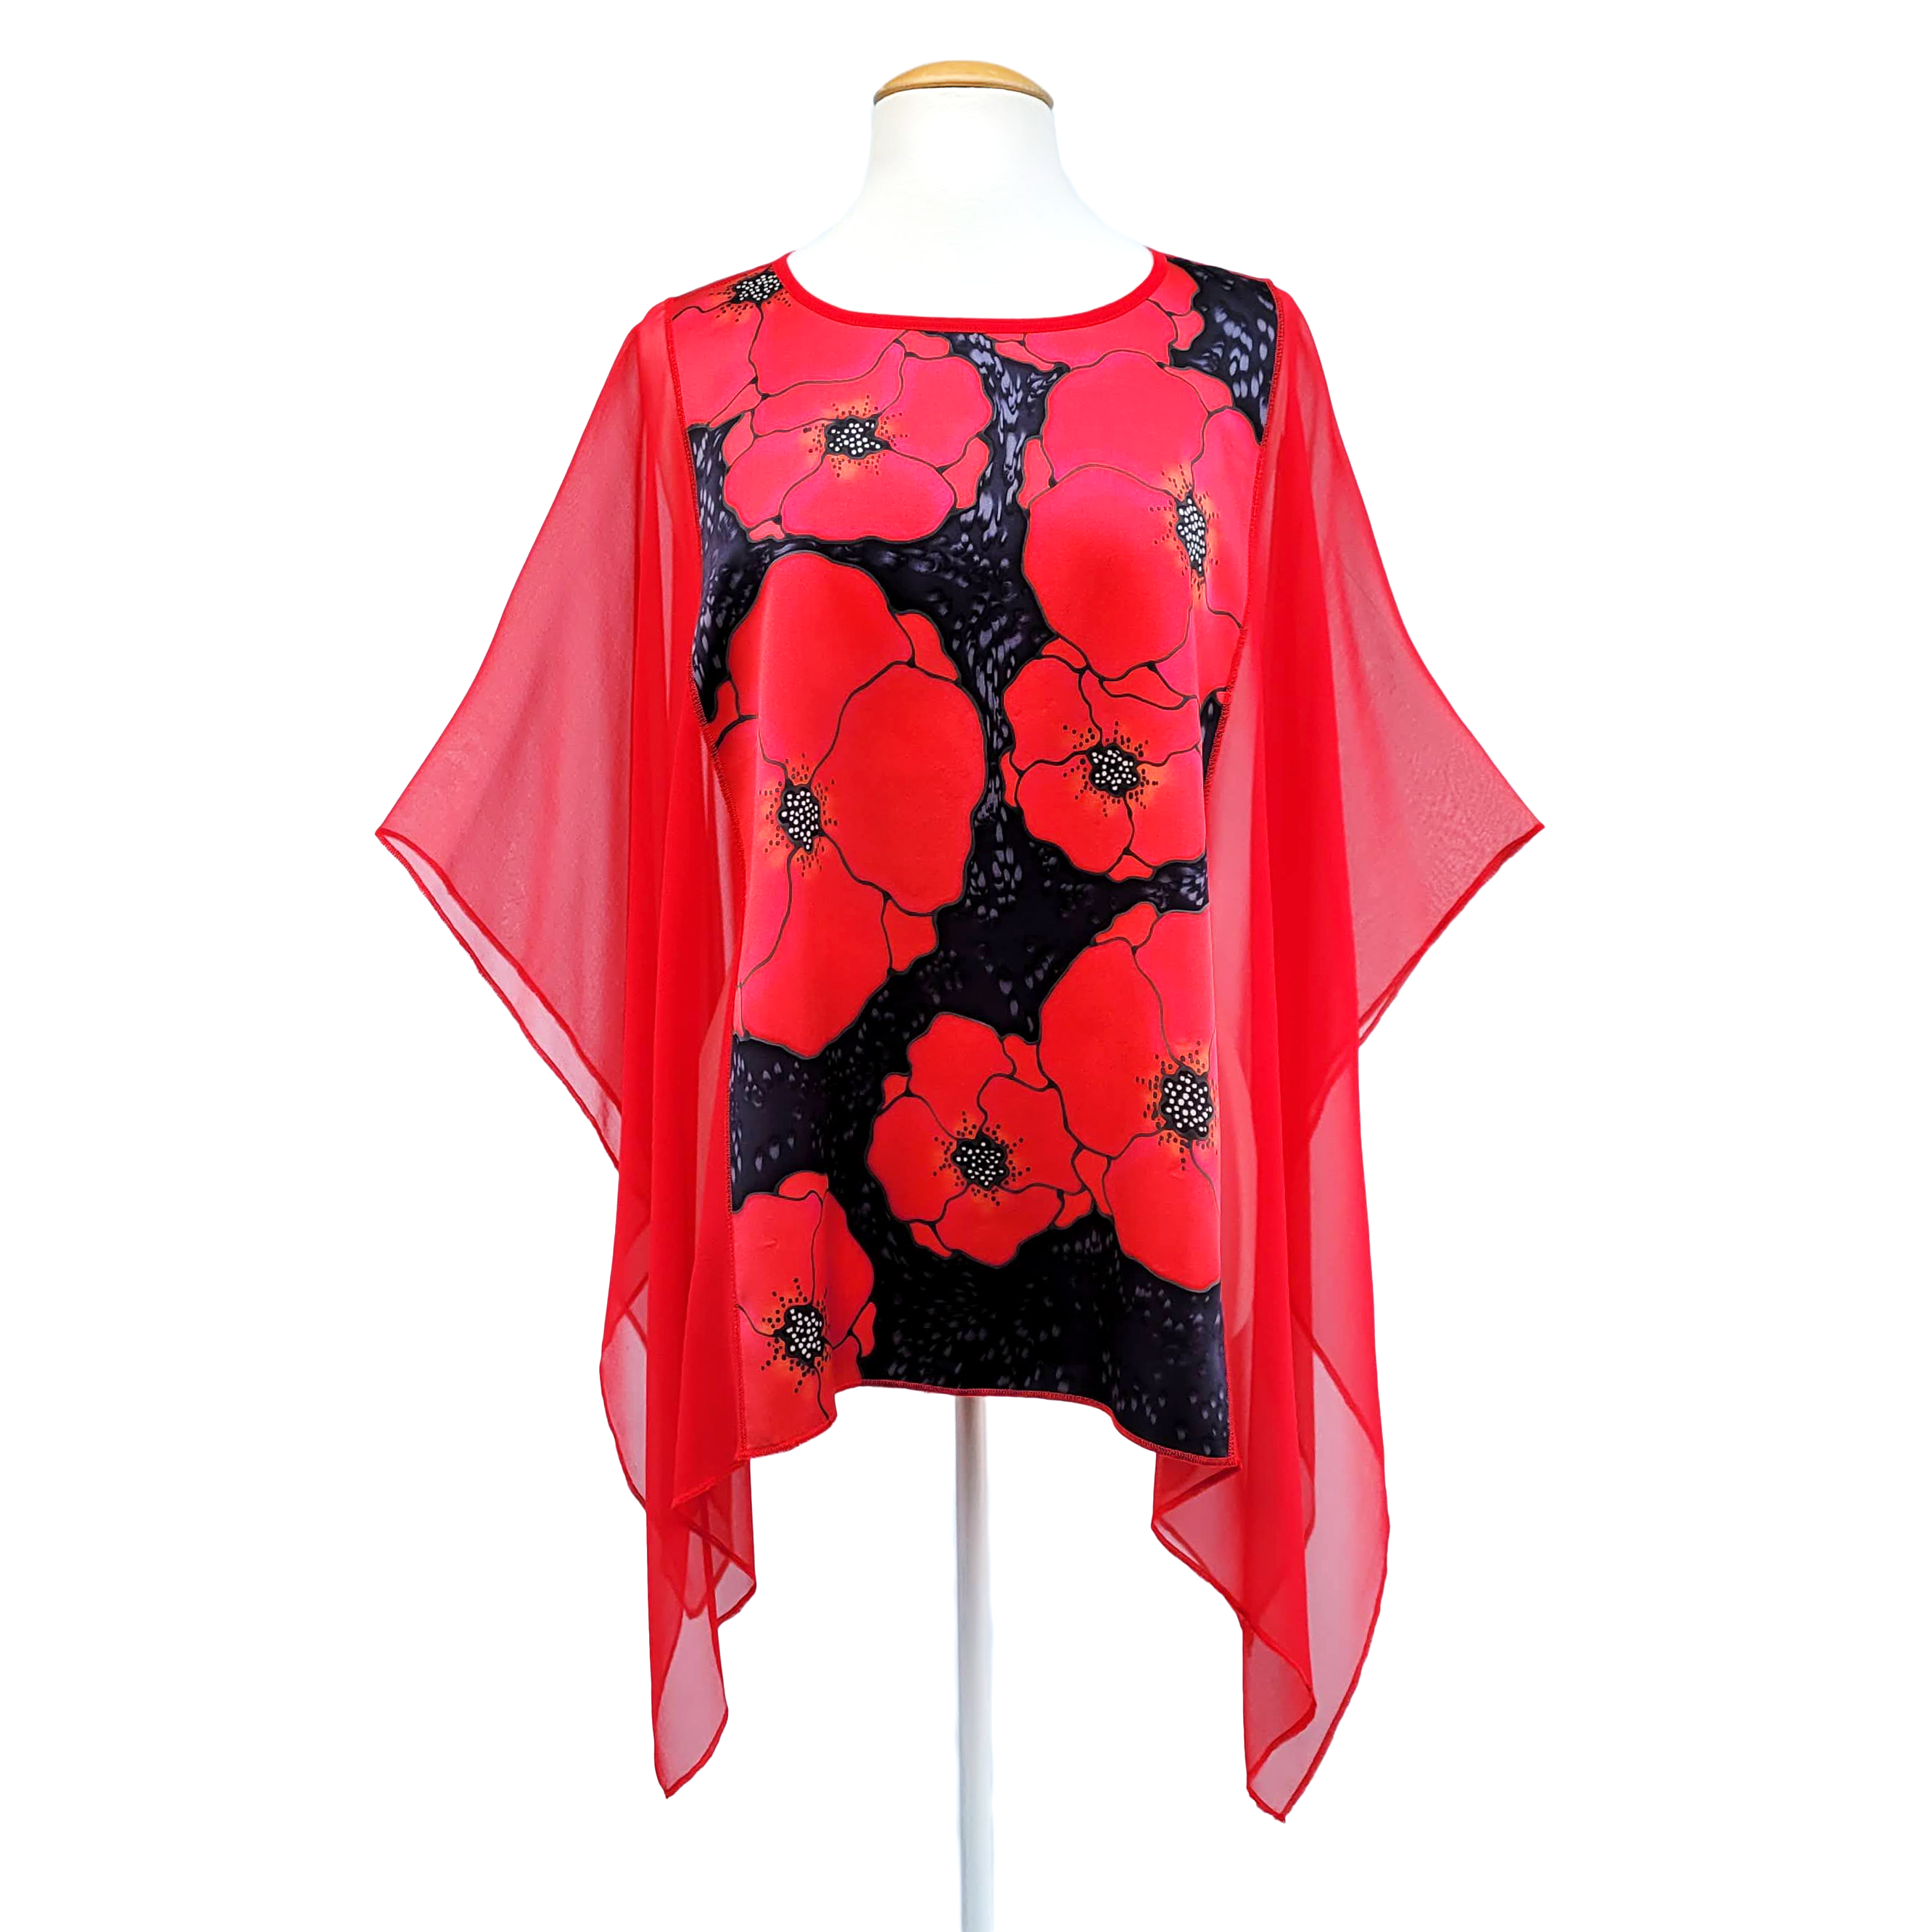 painted silk ladies clothing one size red poncho top hand painted pure silk Red poppy art design handmade by Lynne Kiel